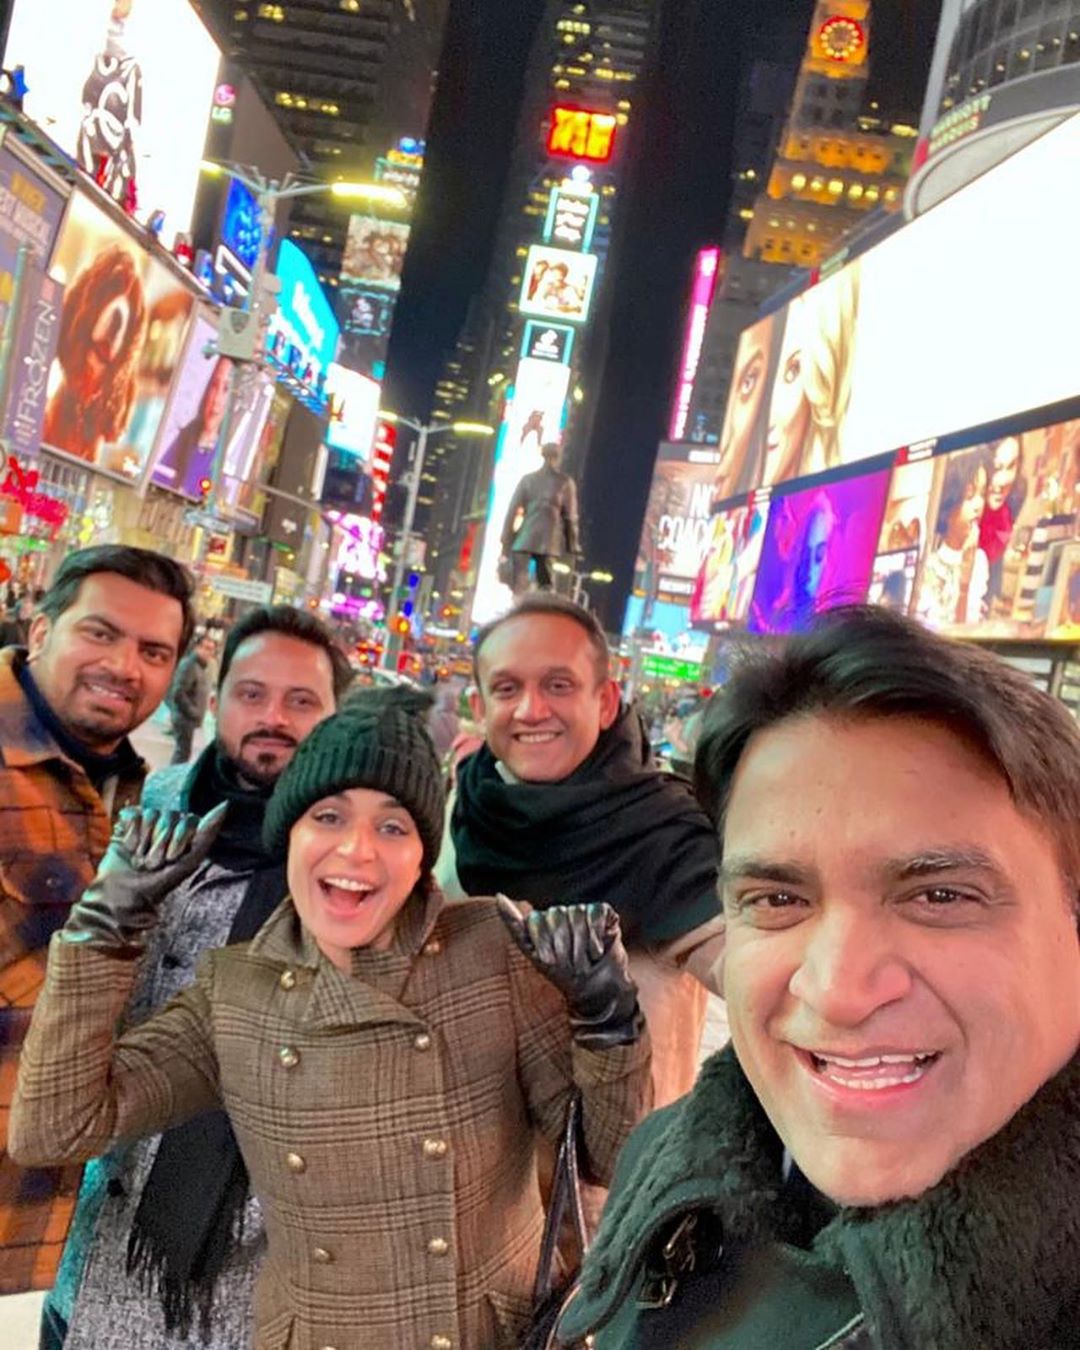 Latest Clicks of Actress Meera from New York USA